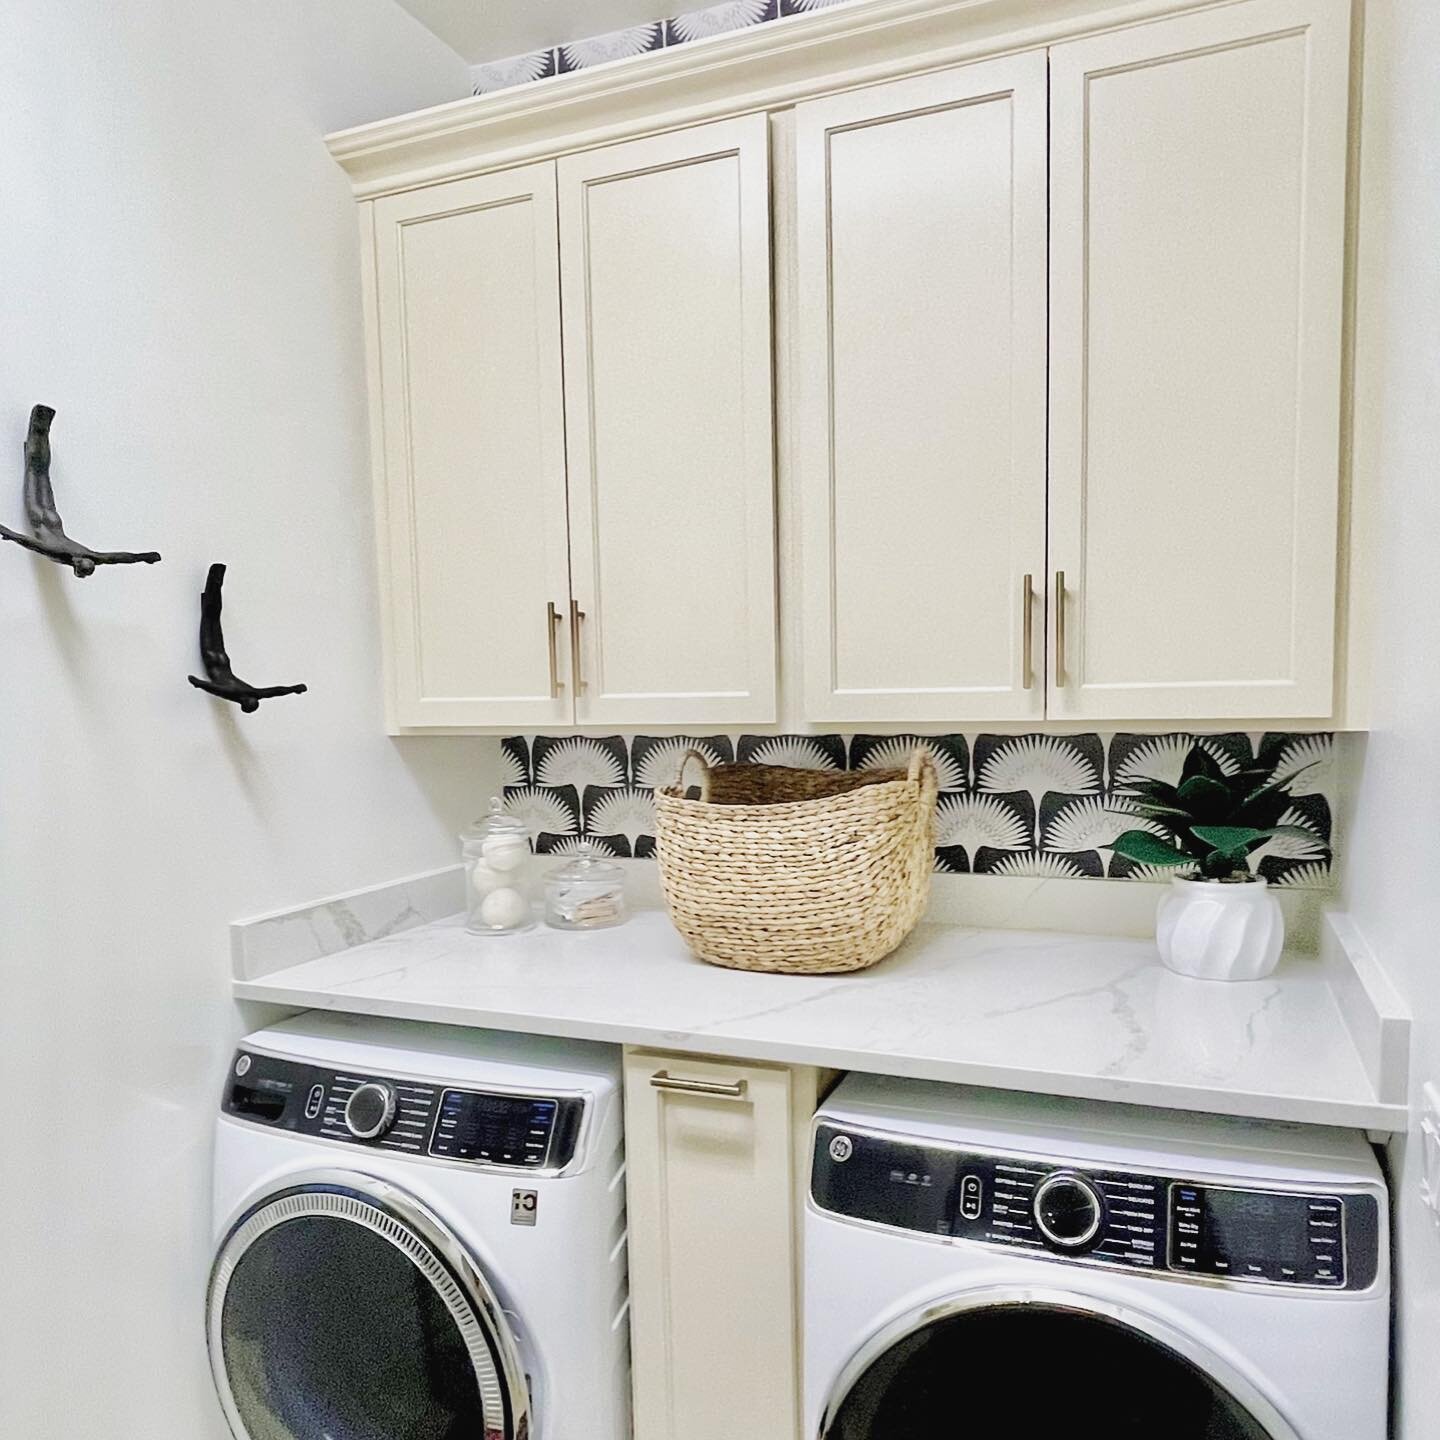 Pretty little laundry room renovation! Doing laundry is much less of a chore now 🤗